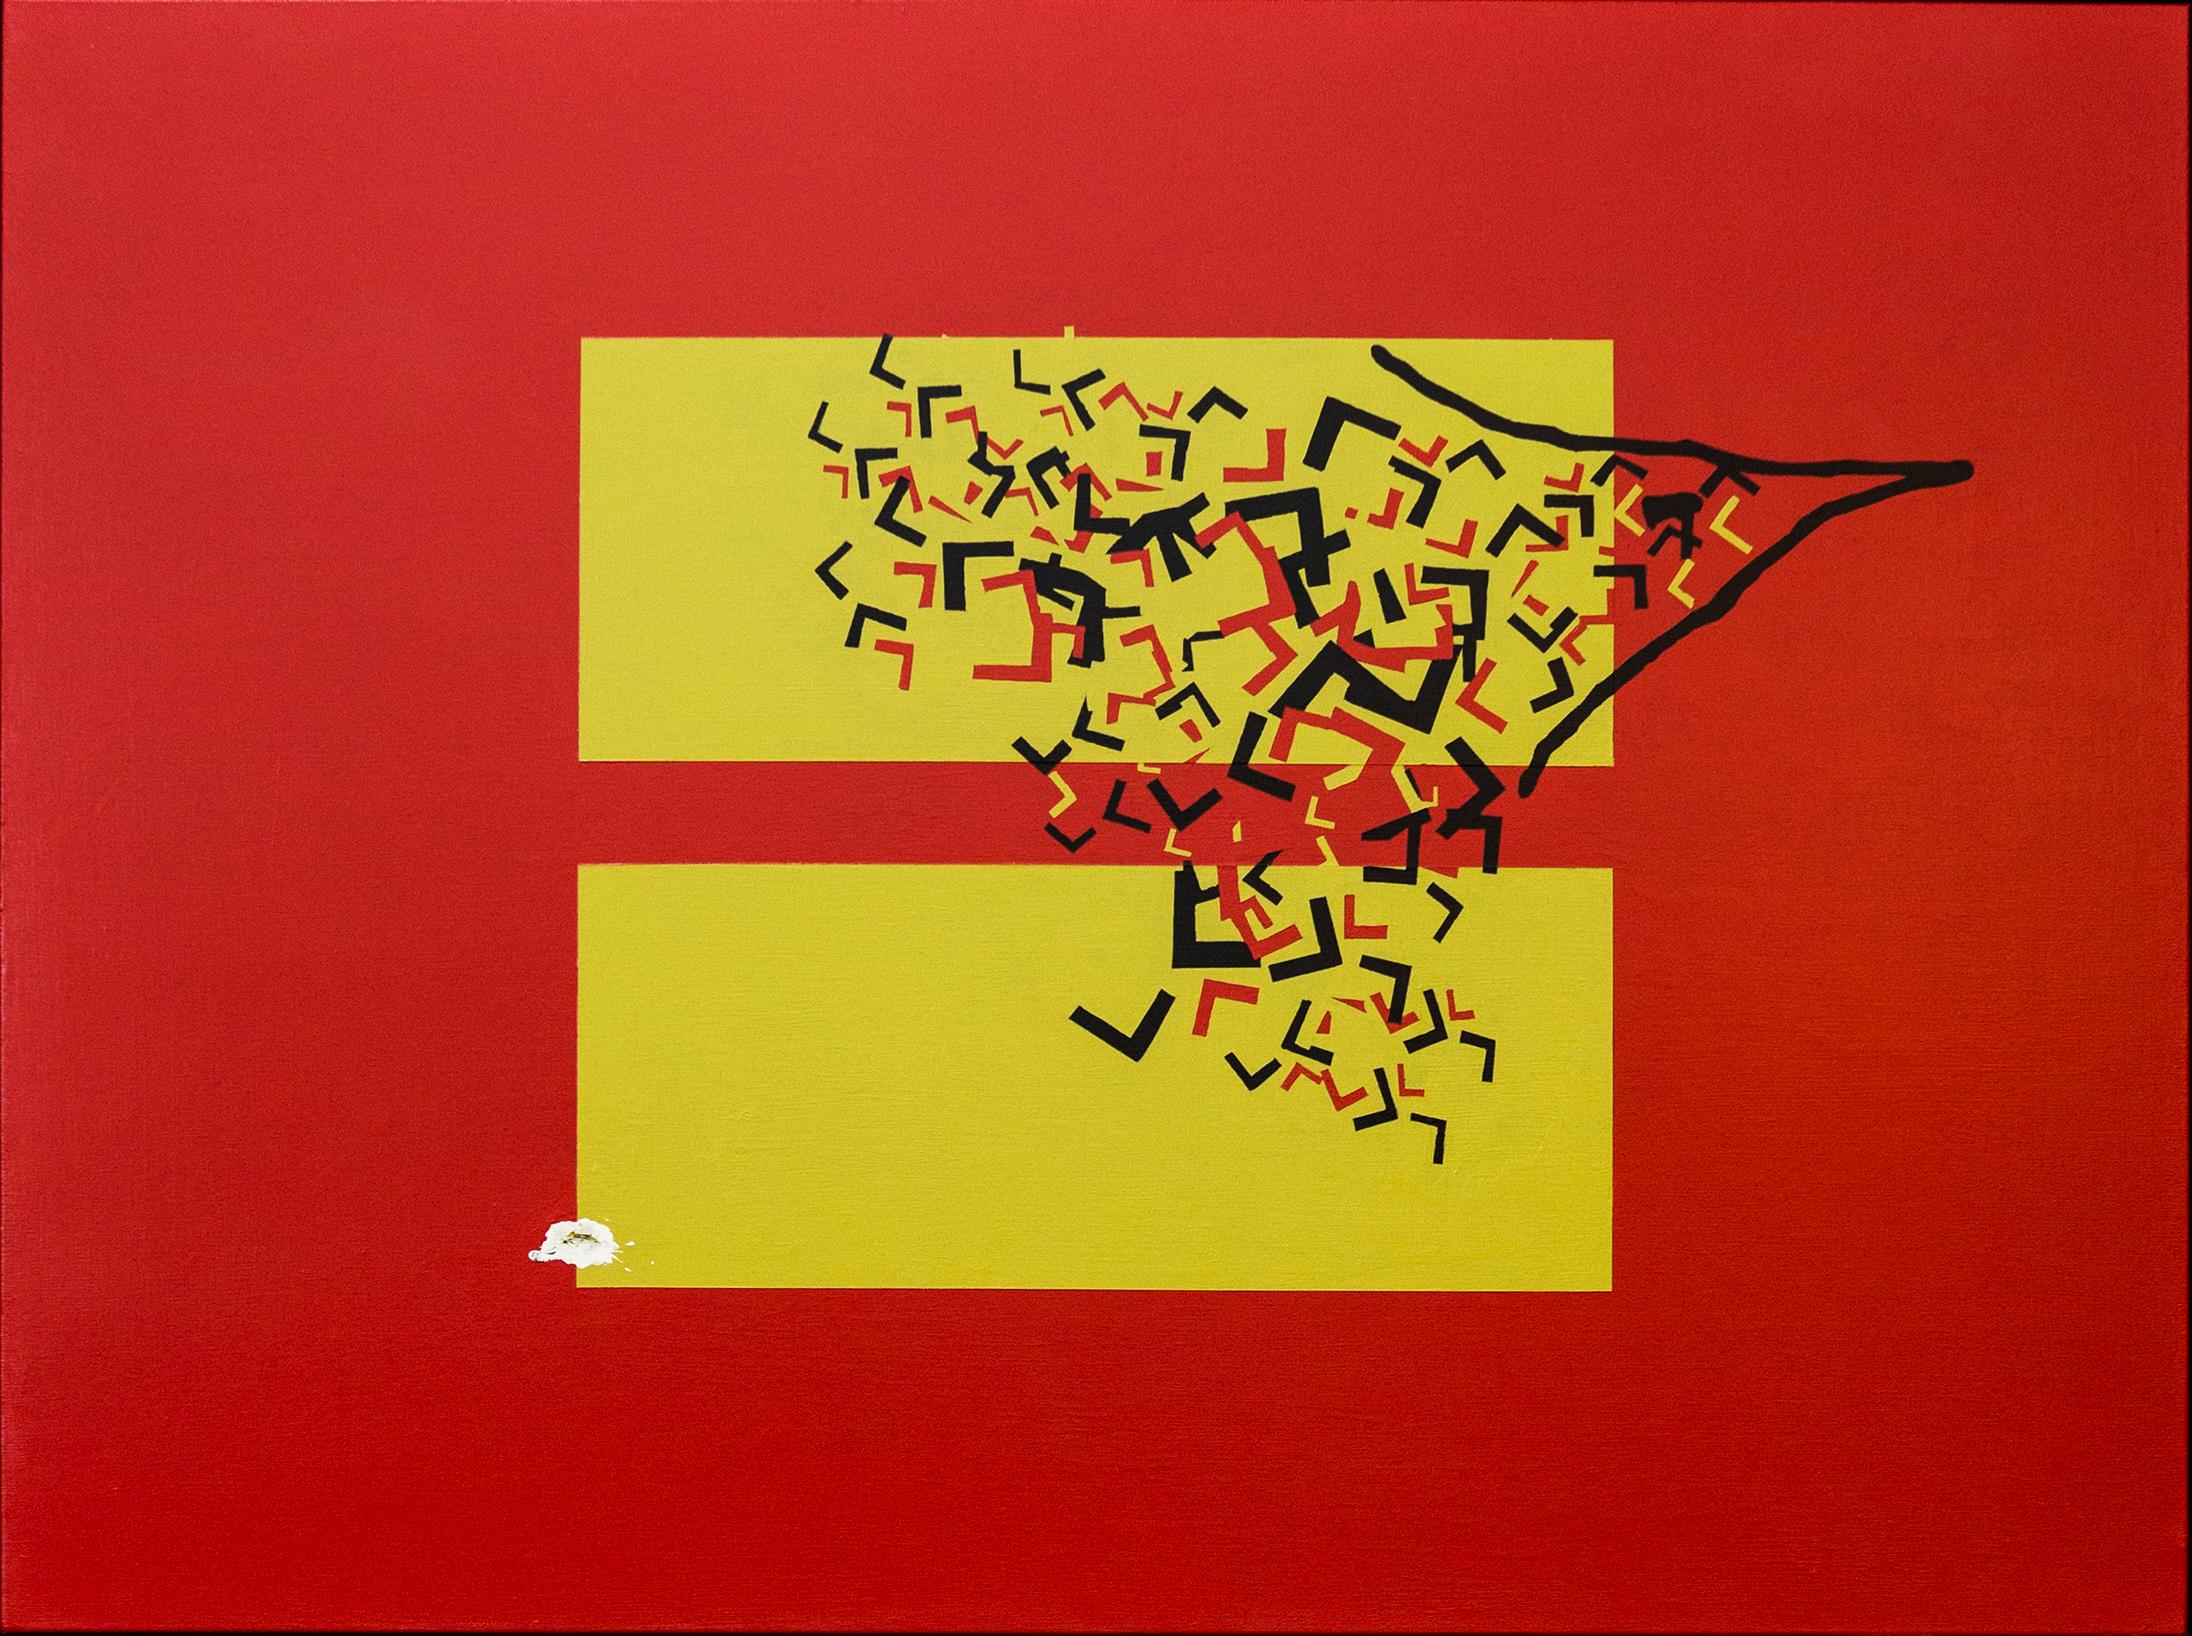 "Equality of Outcome" Acrylic on canvas Painting 36" x 48" inch by Ty Joseph